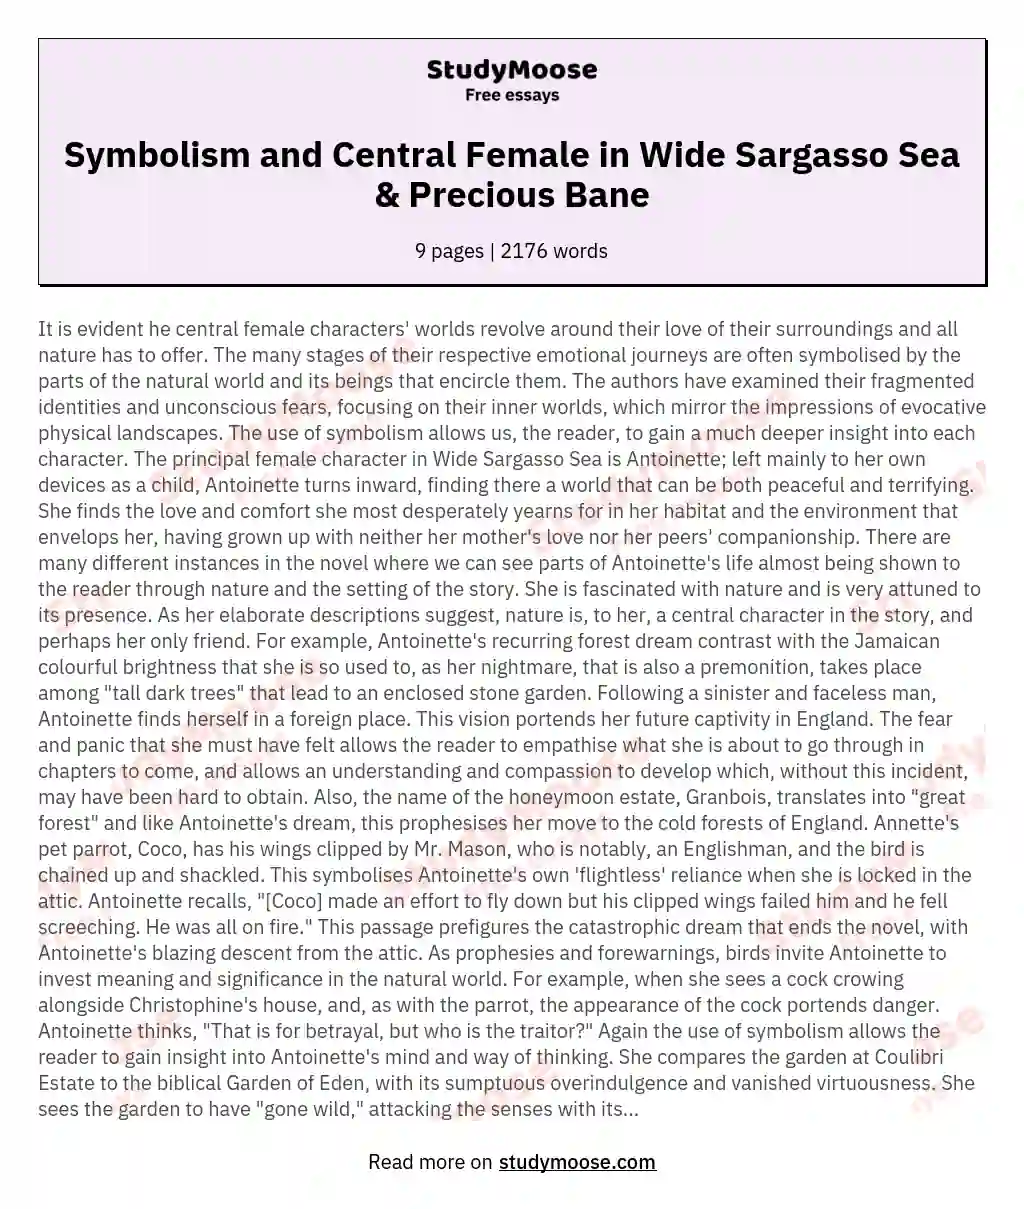 How does the use of symbolism inform our understanding of the central female characters in the novels 'Wide Sargasso Sea' and 'Precious Bane'?